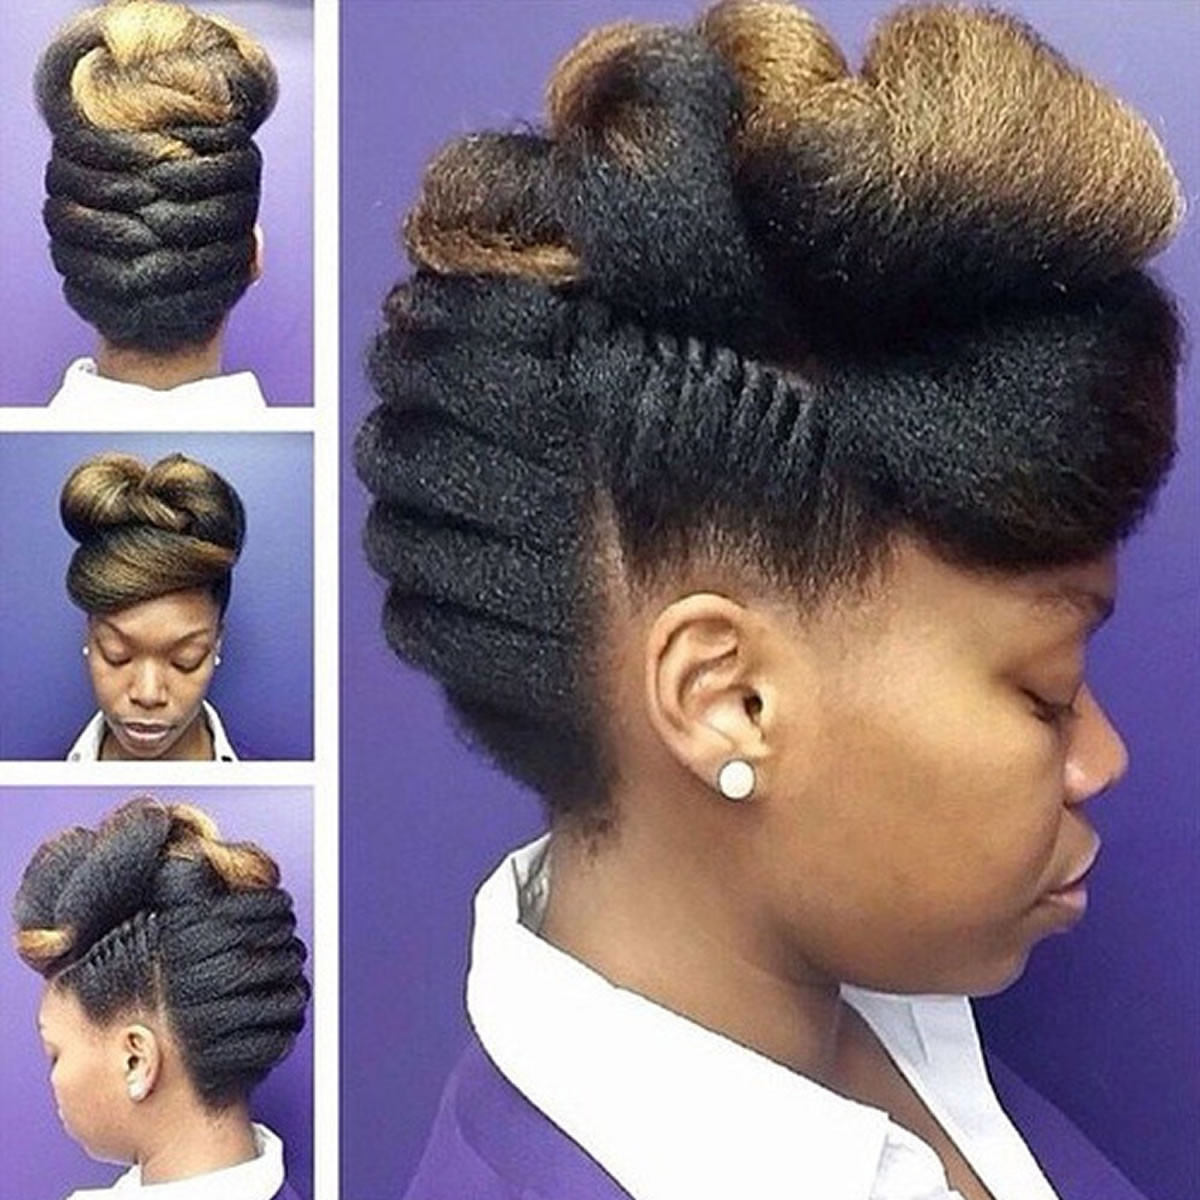 Twisted Updo Hairstyles African American
 20 Best African American Braided Hairstyles for Women 2020